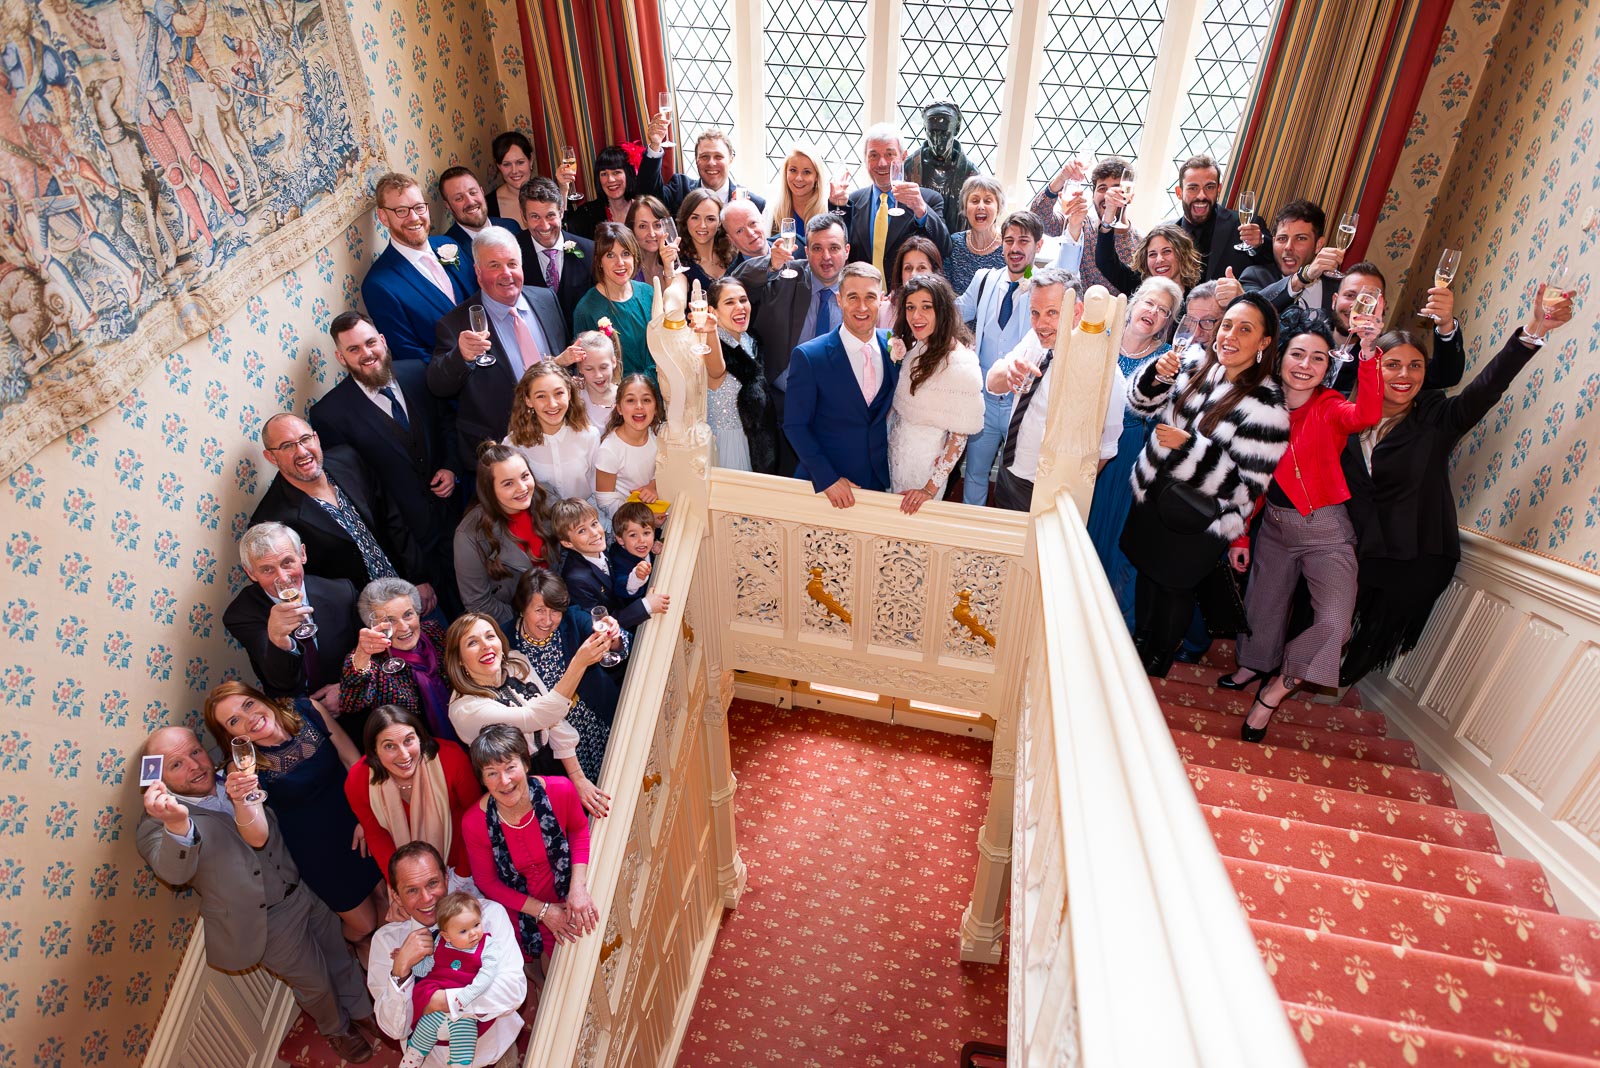 Virgina, Simon and their guests pose for a photo on the stairs at Horsted Place during their wedding reception.